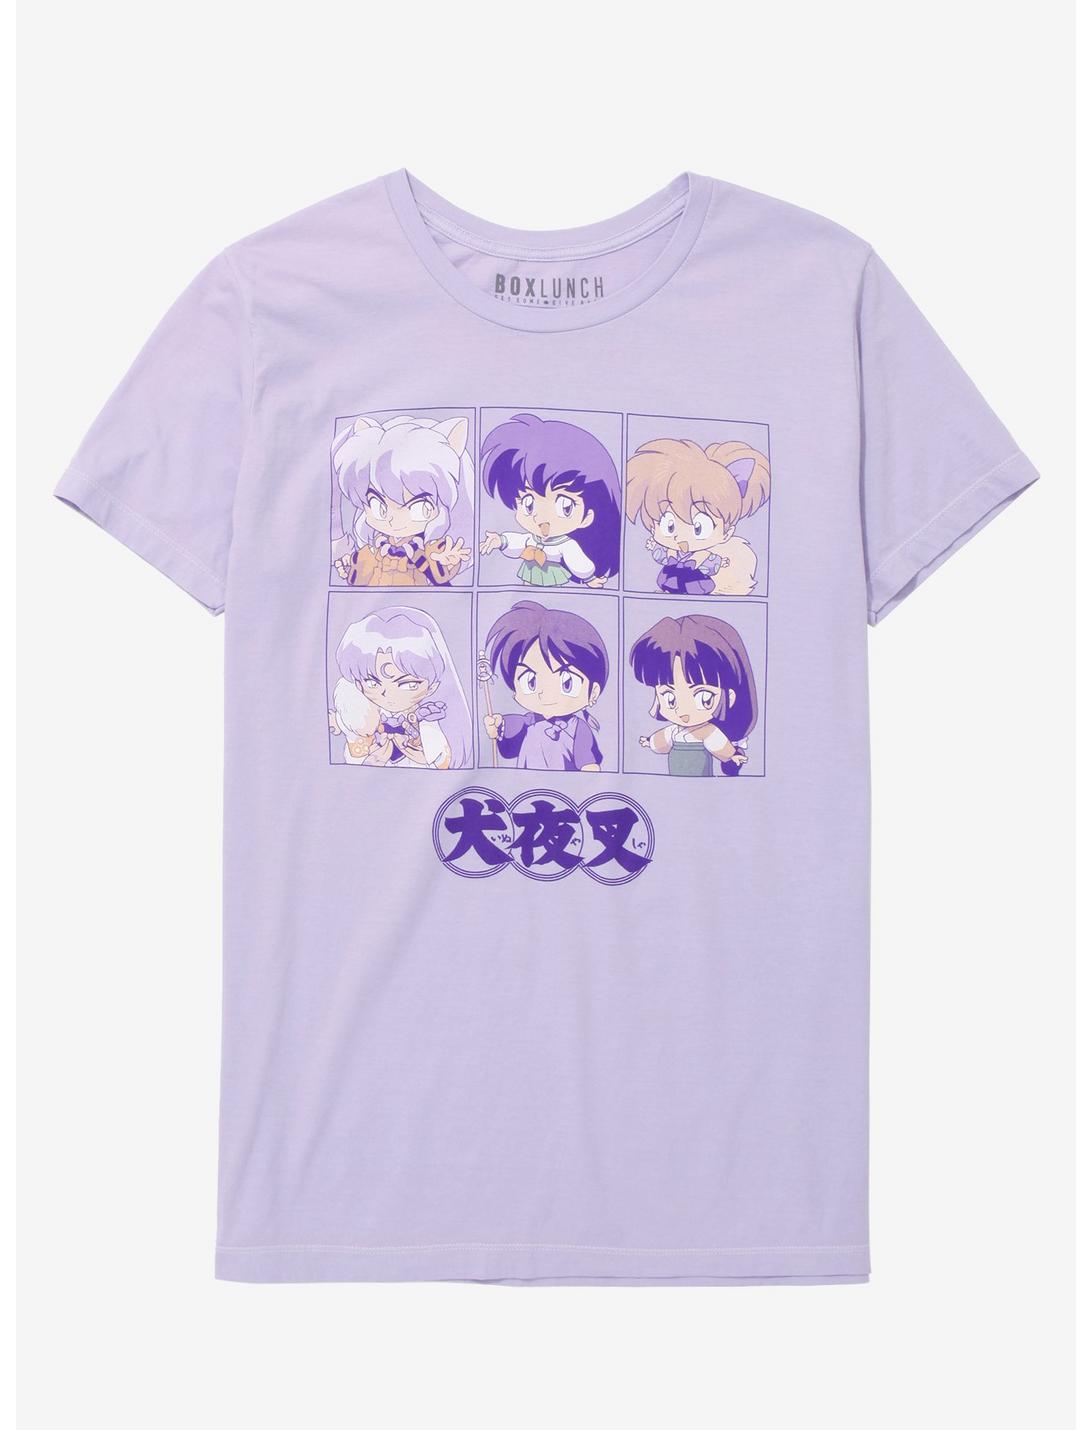 InuYasha Chibi Characters Women's T-Shirt - BoxLunch Exclusive, LAVENDER, hi-res